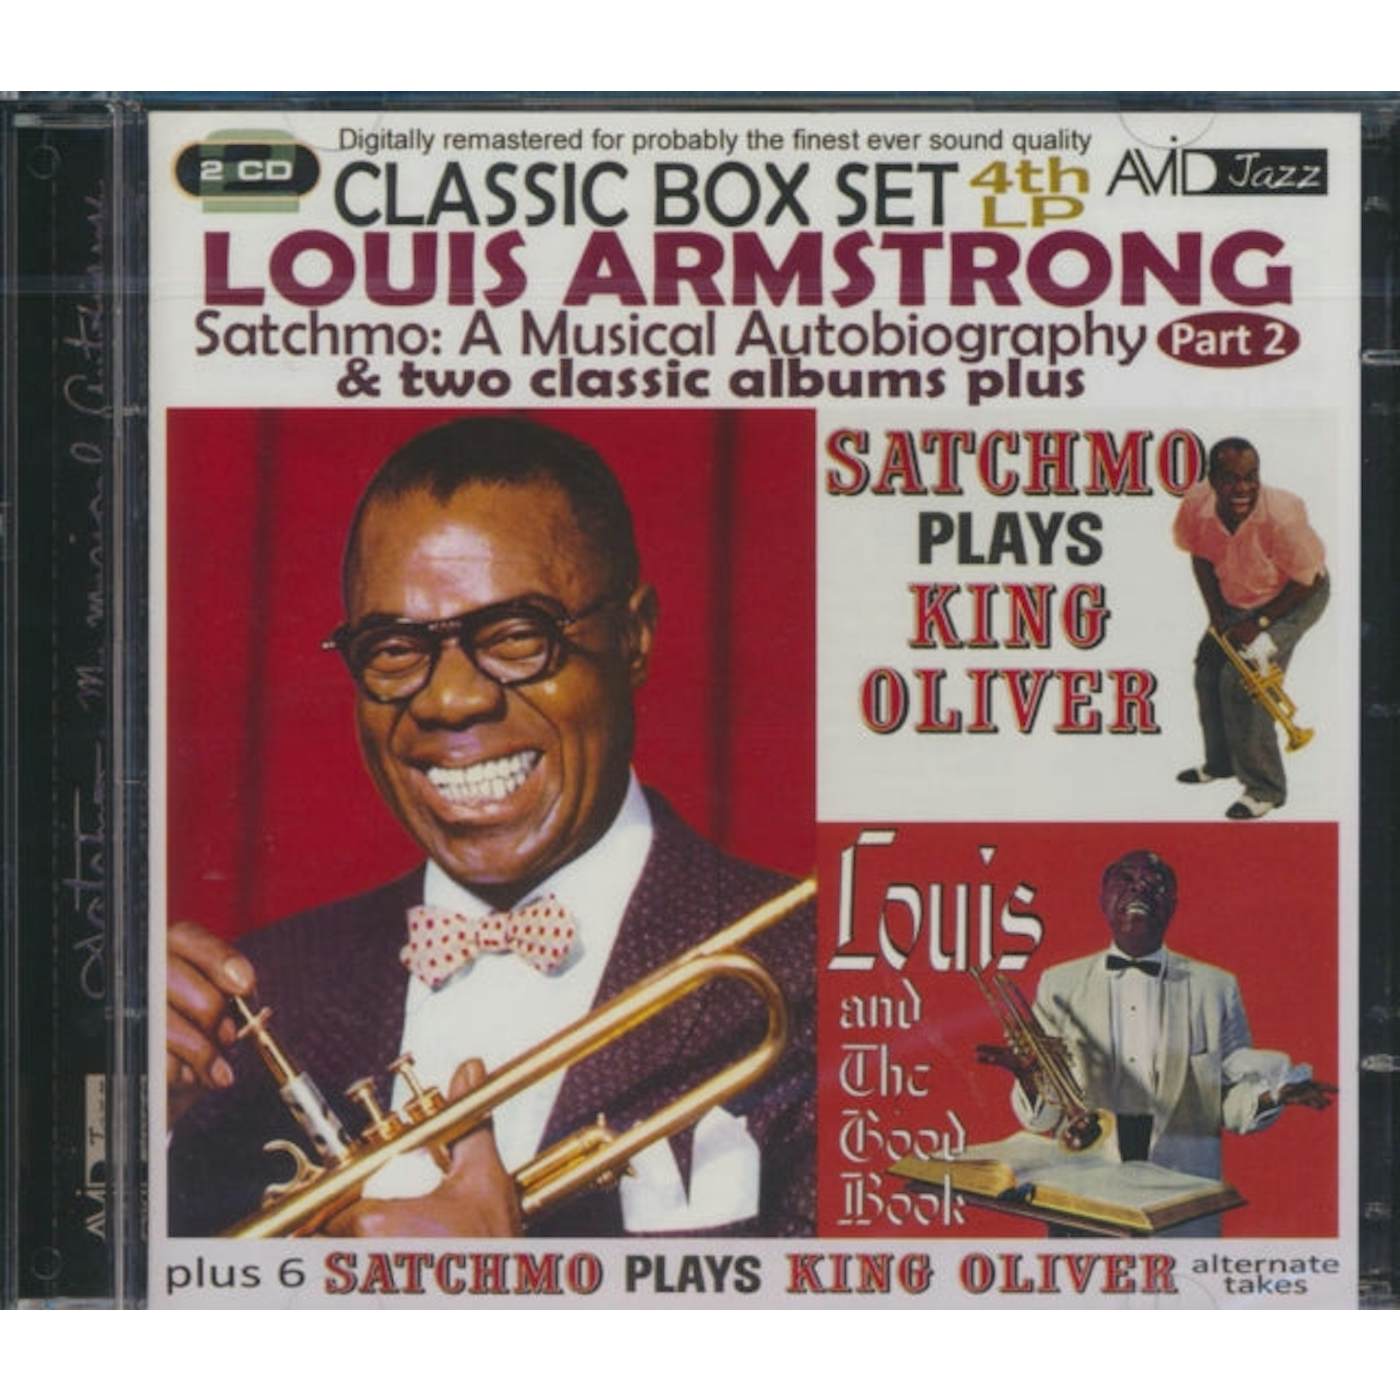 Louis Armstrong CD - Satchmo: A Musical Autobiography - Part 2 (4th LP Vinyl Record) & Two Classic Albums Plus (Satchmo Plays King Oliver / Louis And The Good Book)